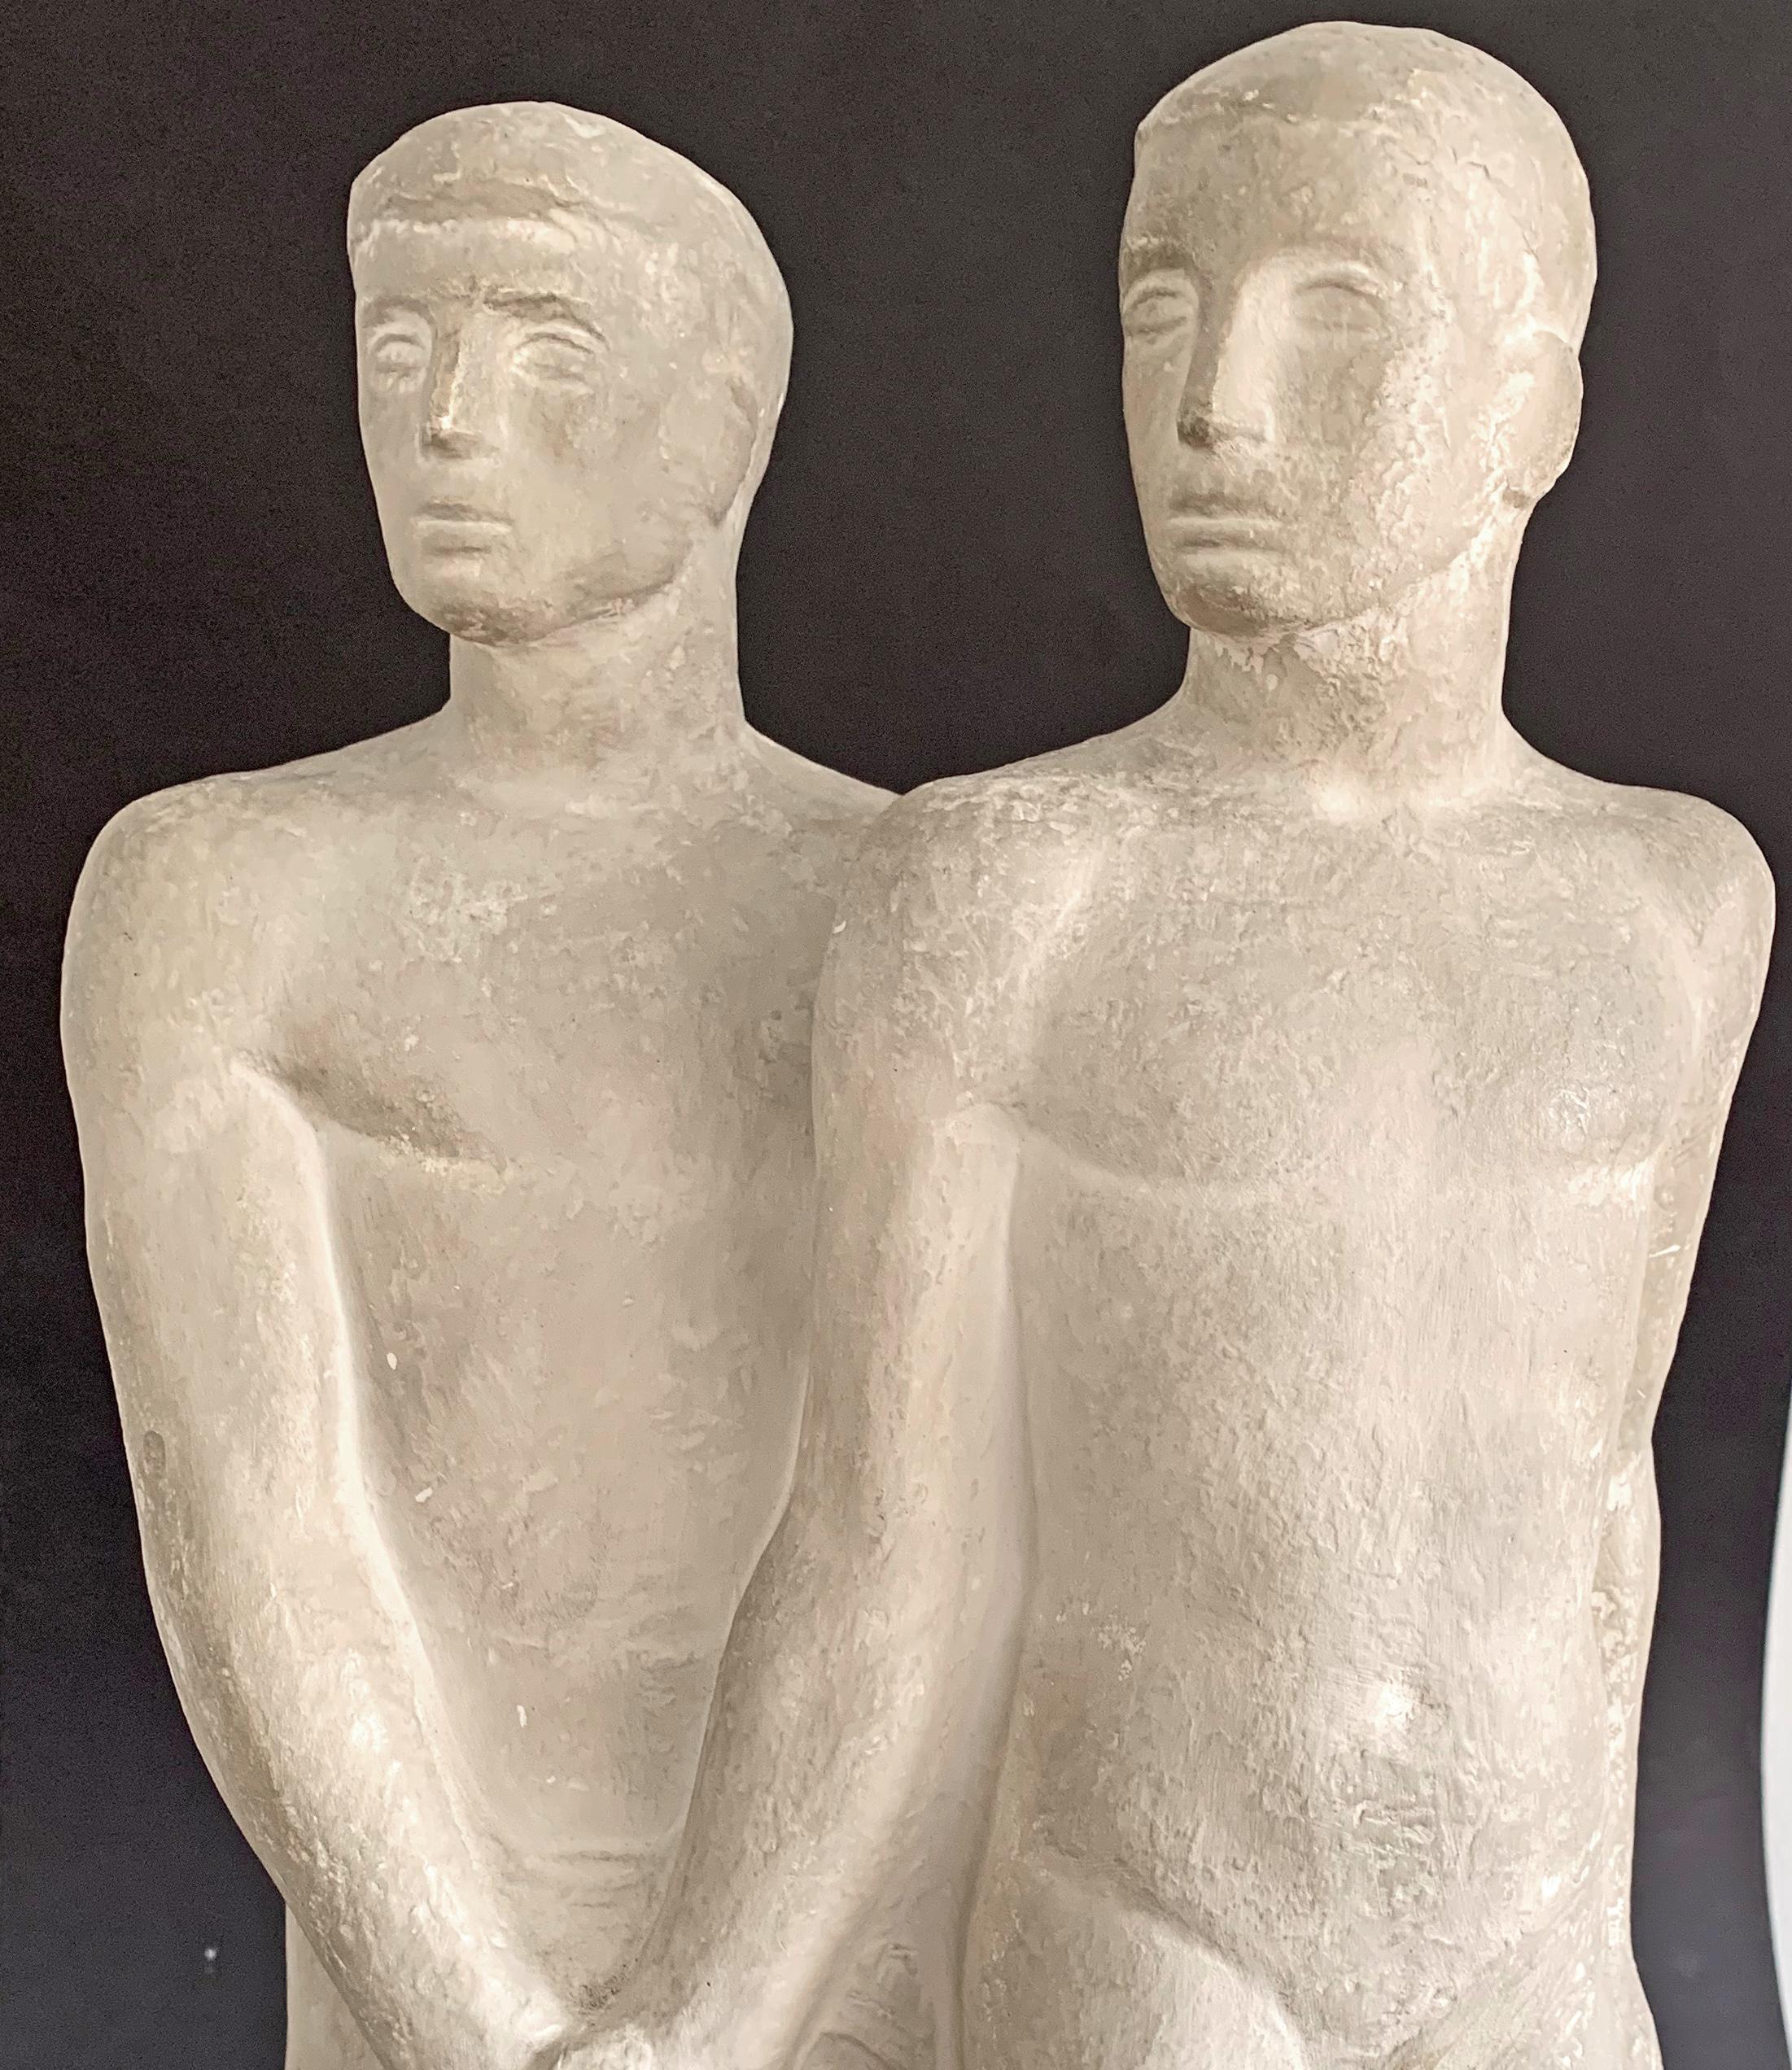 Beautiful and dignified, this remarkable and powerful sculpture depicts a nude male couple clasping hands, either in solidarity, collegiality or intimacy -- it is difficult to be certain. Given that the reverse of the sculpture shows one figure